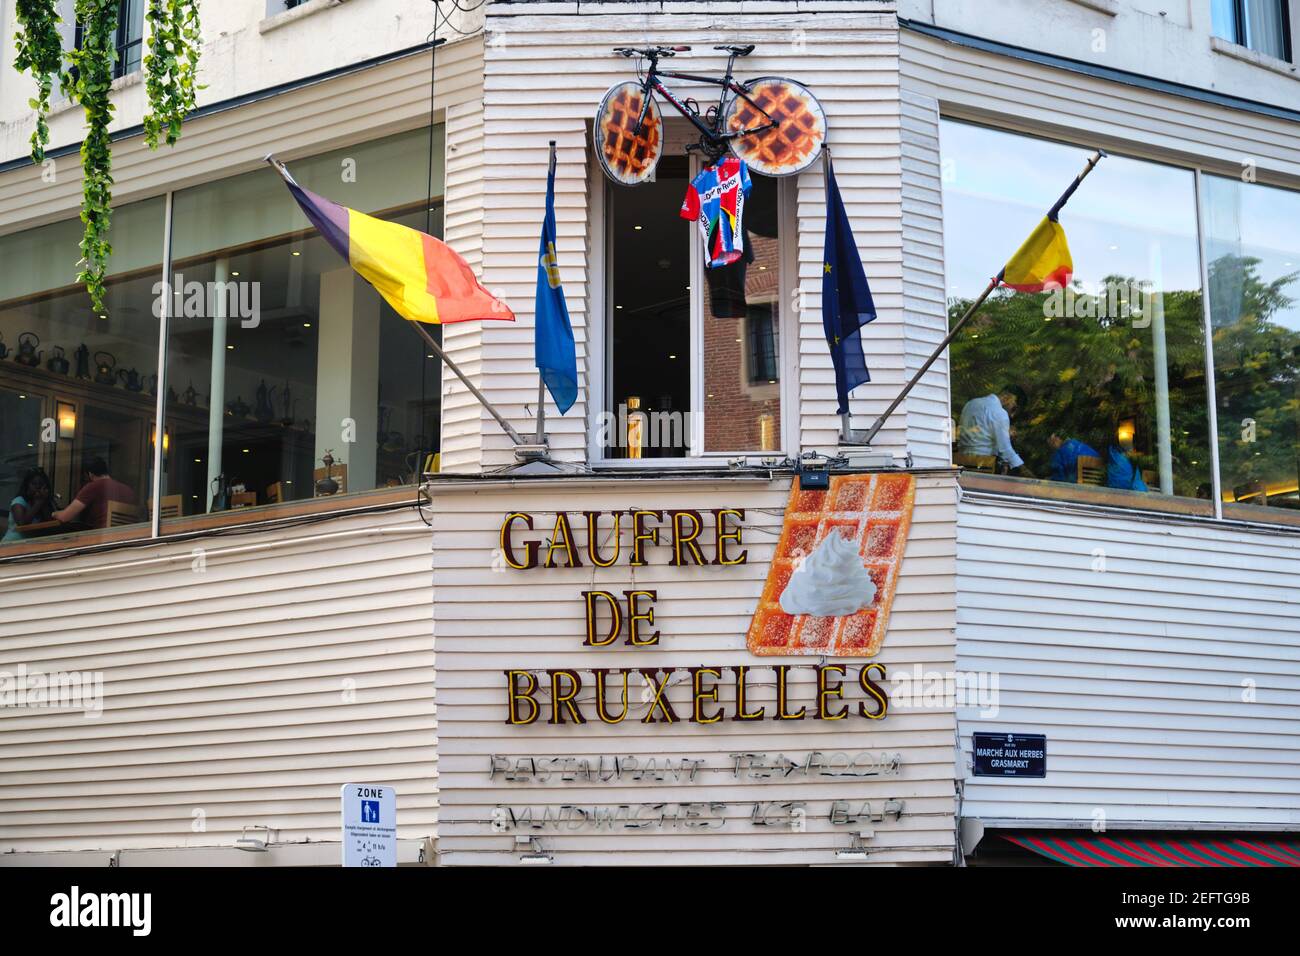 Exterior View of a Famous Belgian Waffle Restaurant, Brussels, Belgium Stock Photo